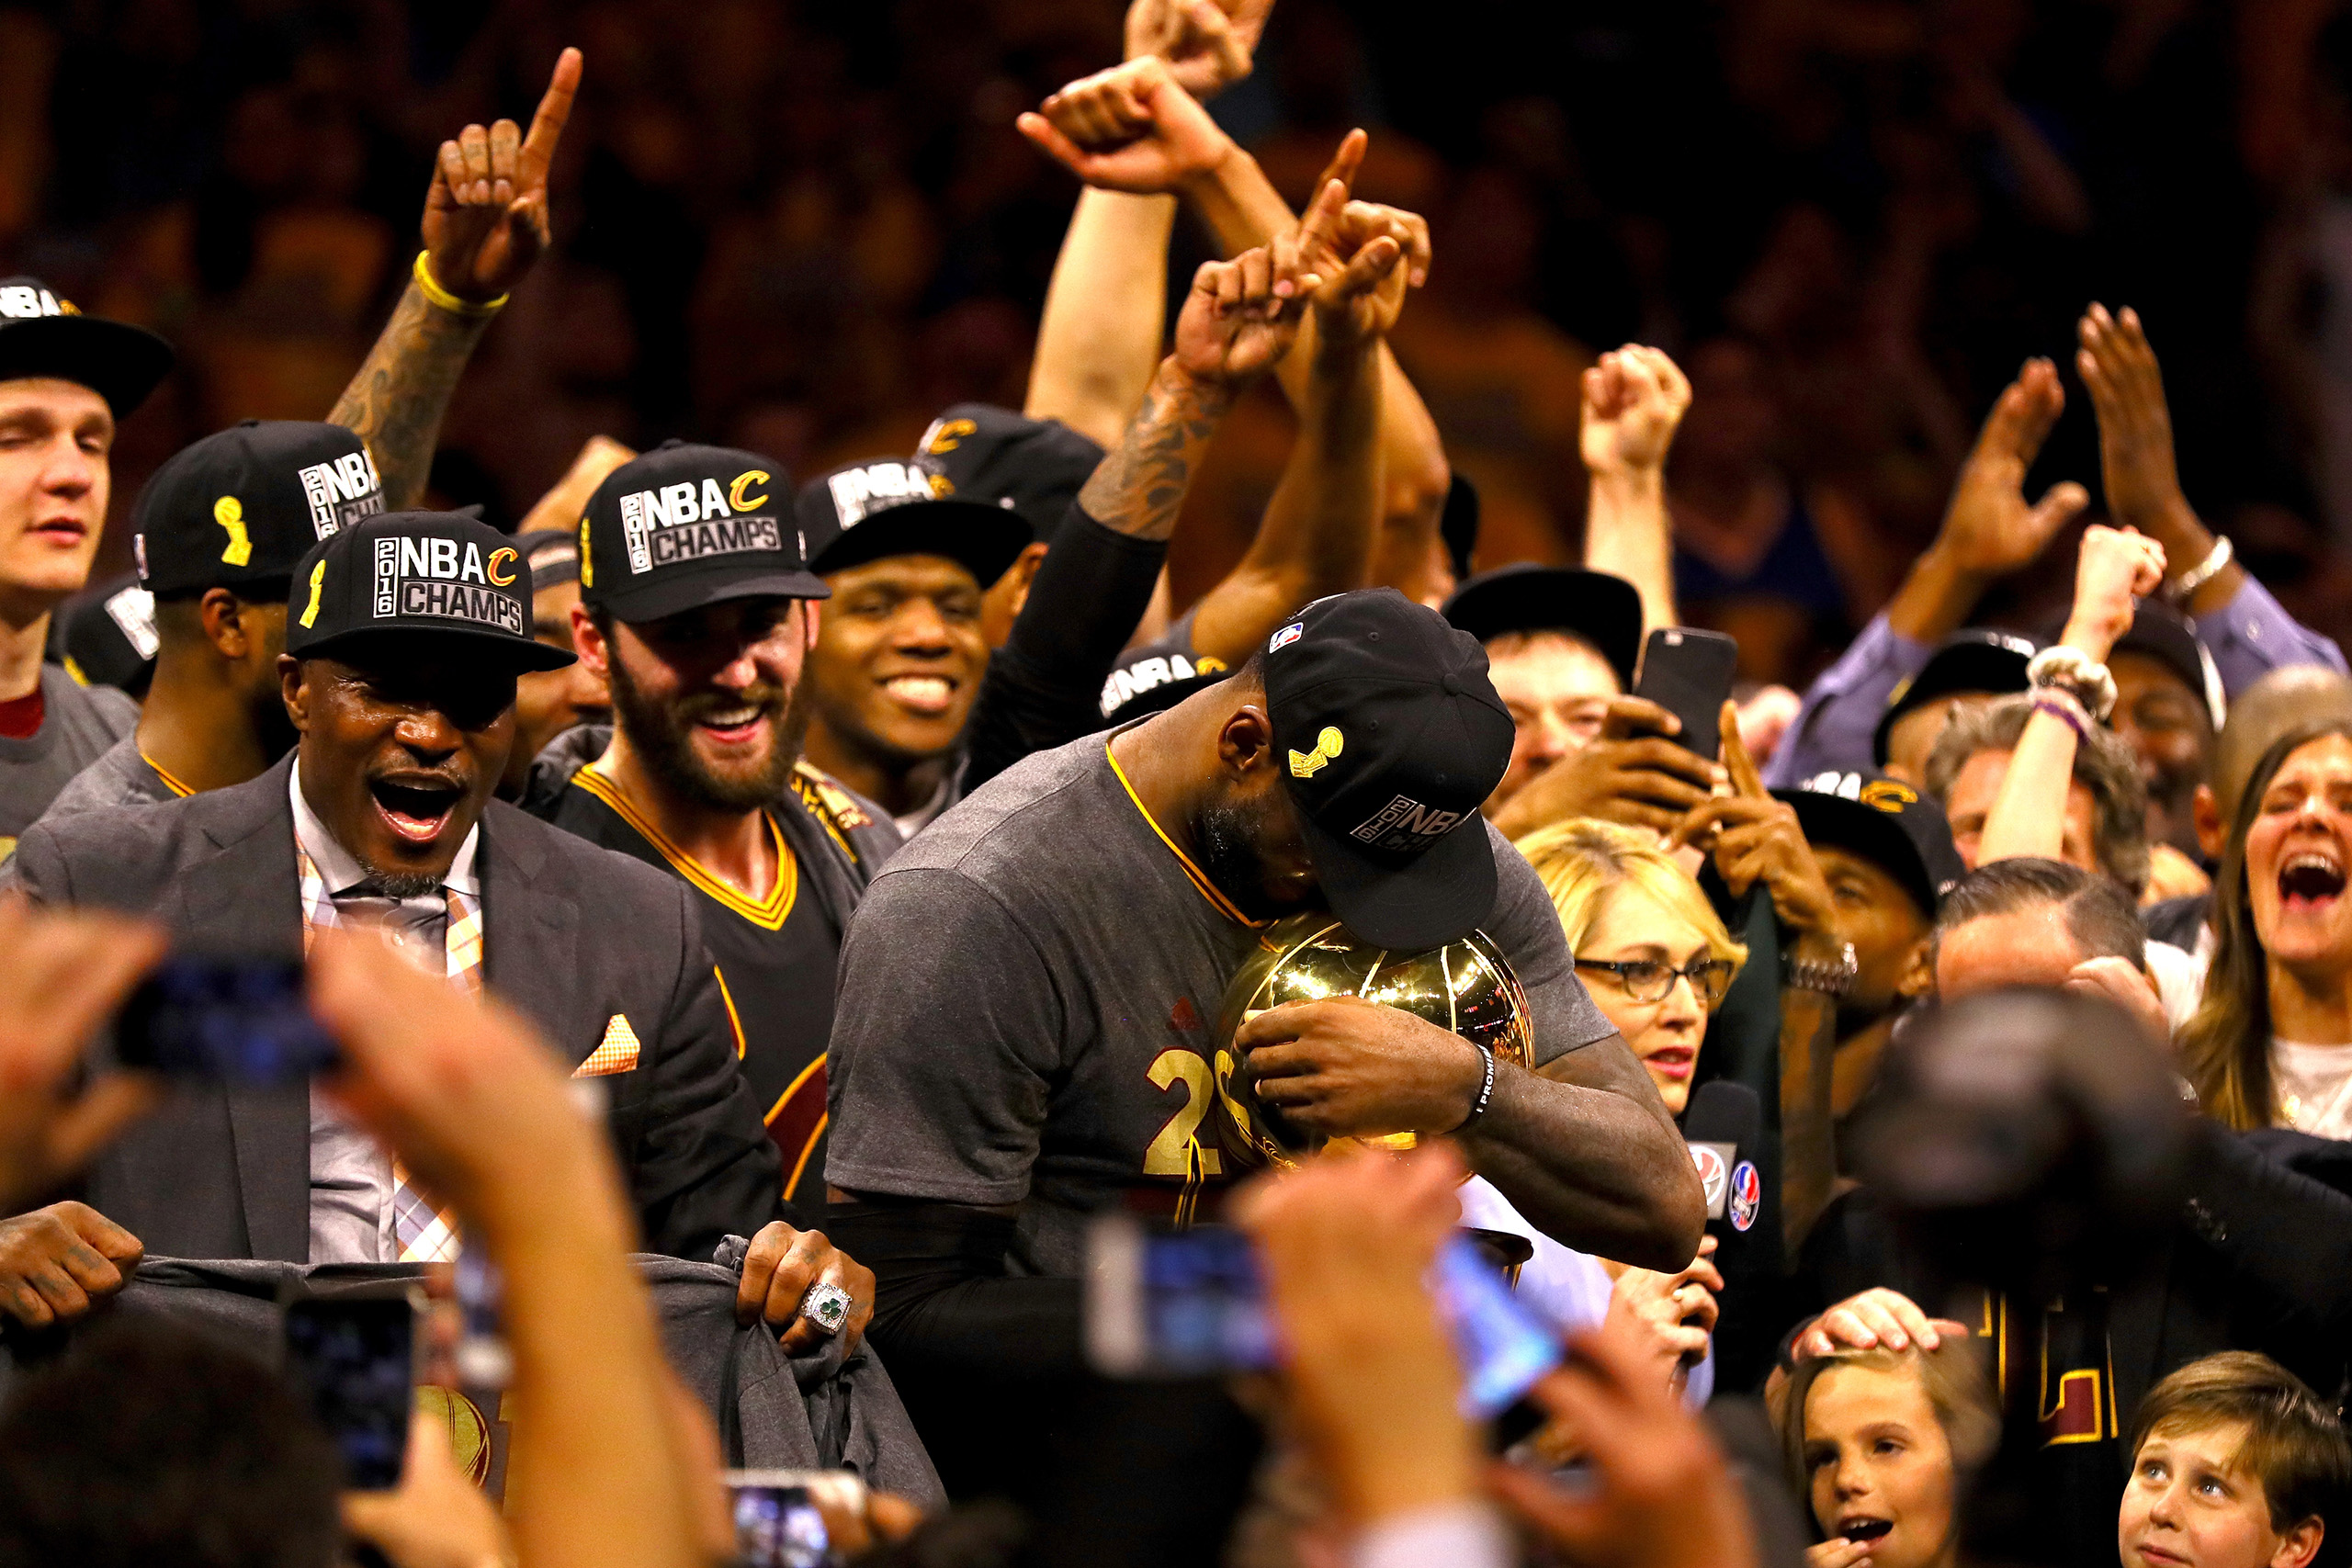 LeBron James, #23 of the Cleveland Cavaliers, holds the Larry O'Brien Championship Trophy after defeating the Golden State Warriors 93-89 in Game 7 of the 2016 NBA Finals at ORACLE Arena in Oakland, Calif., on June 19, 2016.